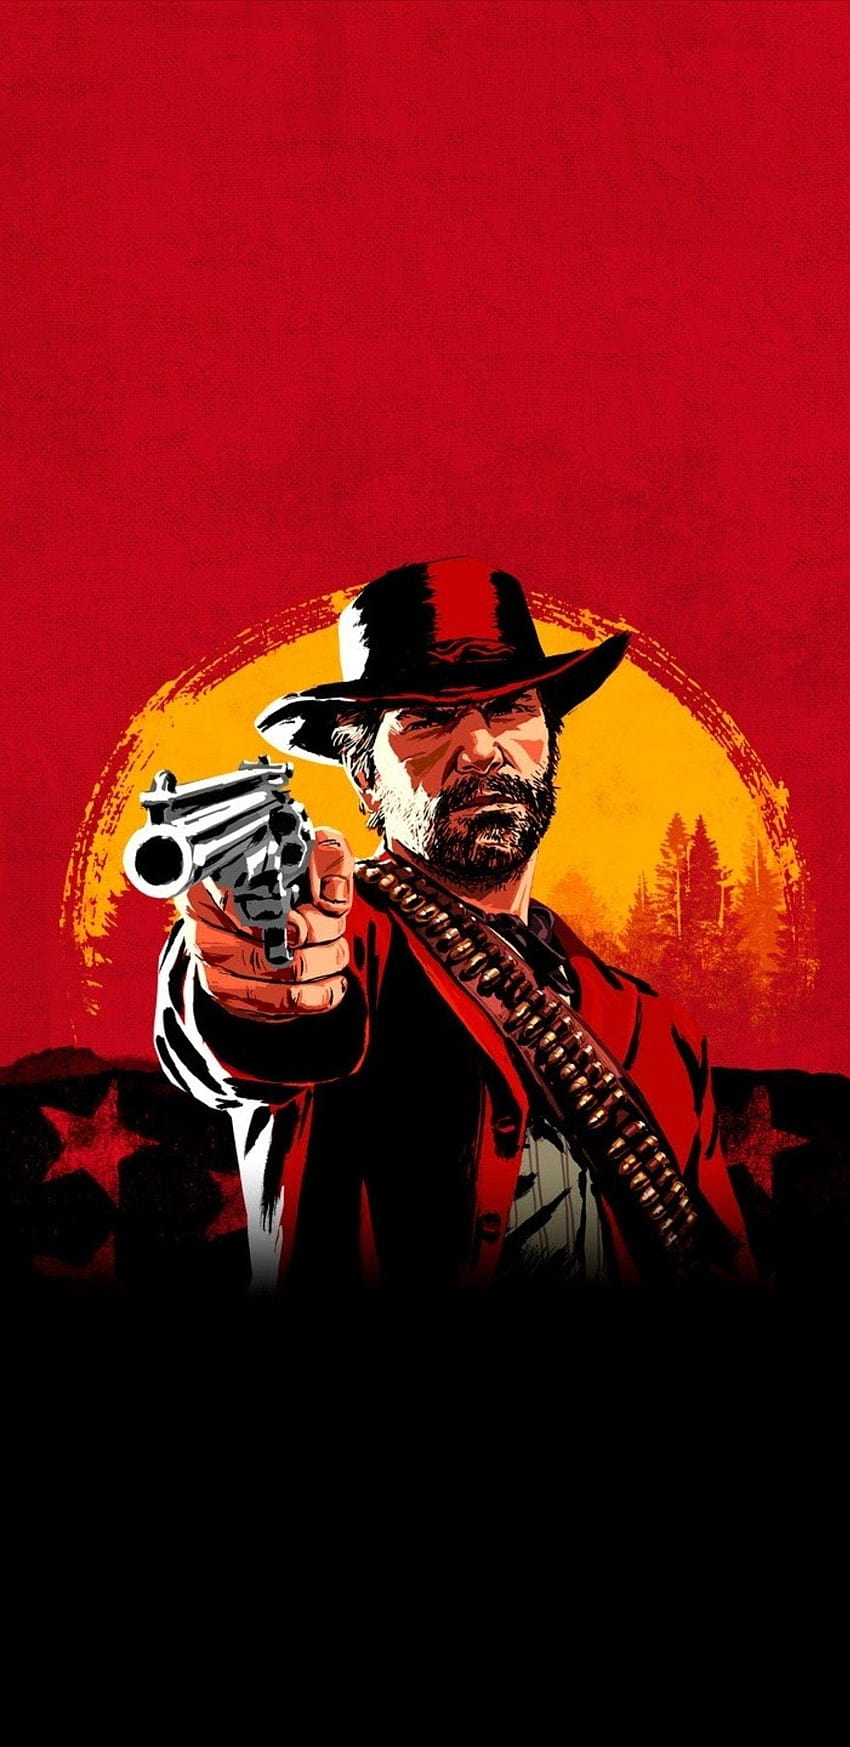 1440x2960 Red Dead Redemption 2 Samsung Galaxy Note 9,8, S9,S8,S, rdr2 ...